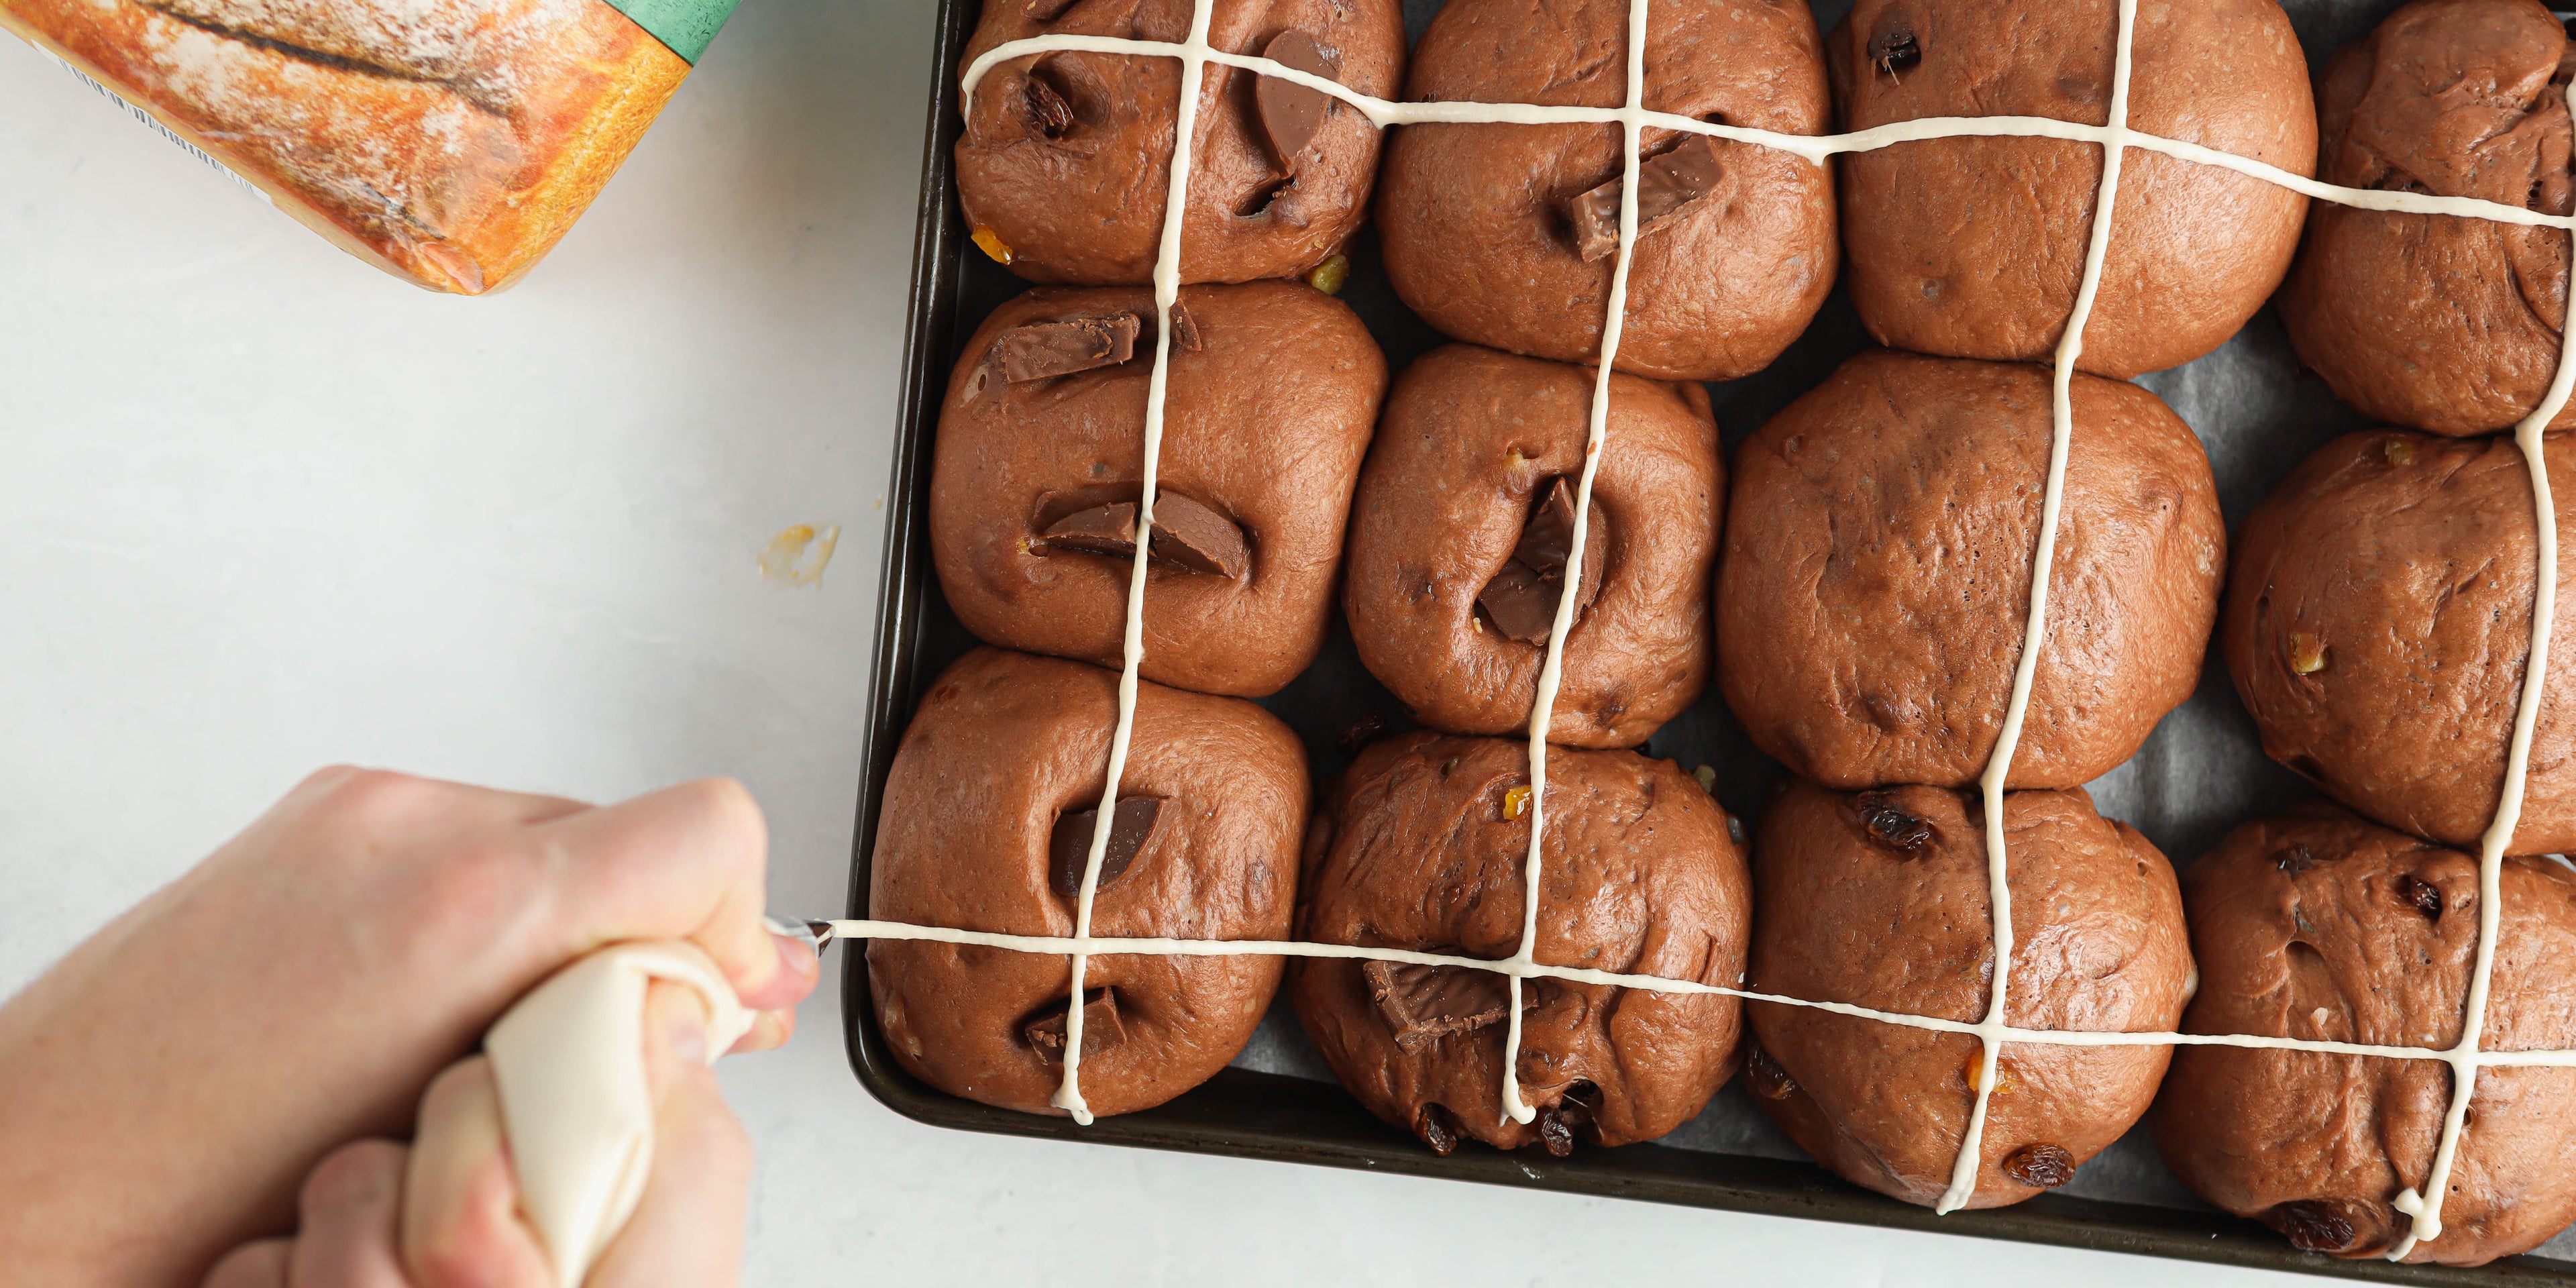 Top view of Chocolate Hot Cross Buns being piped with the traditional cross, with hands holding a piping bag